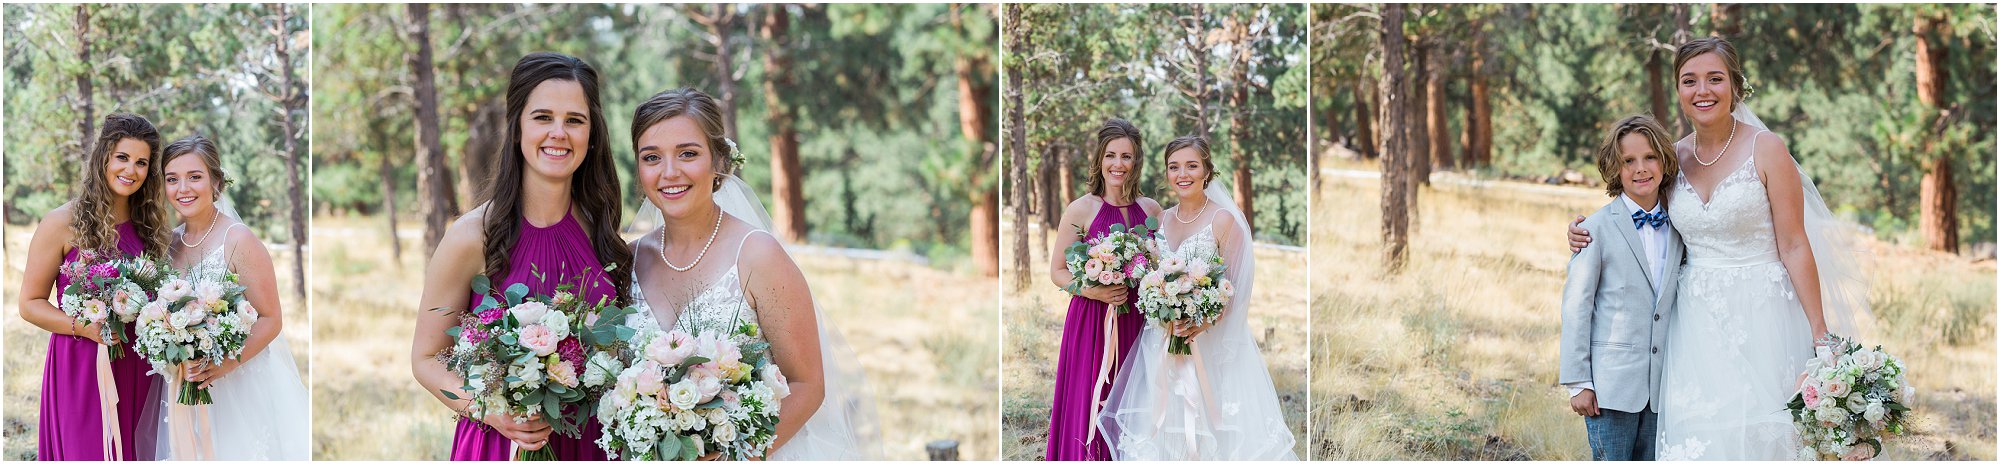 The bride has individual photos with her gorgeous bridesmaids and handsome ringbearer at this outdoor rustic ranch wedding in Bend, OR. | Erica Swantek Photography